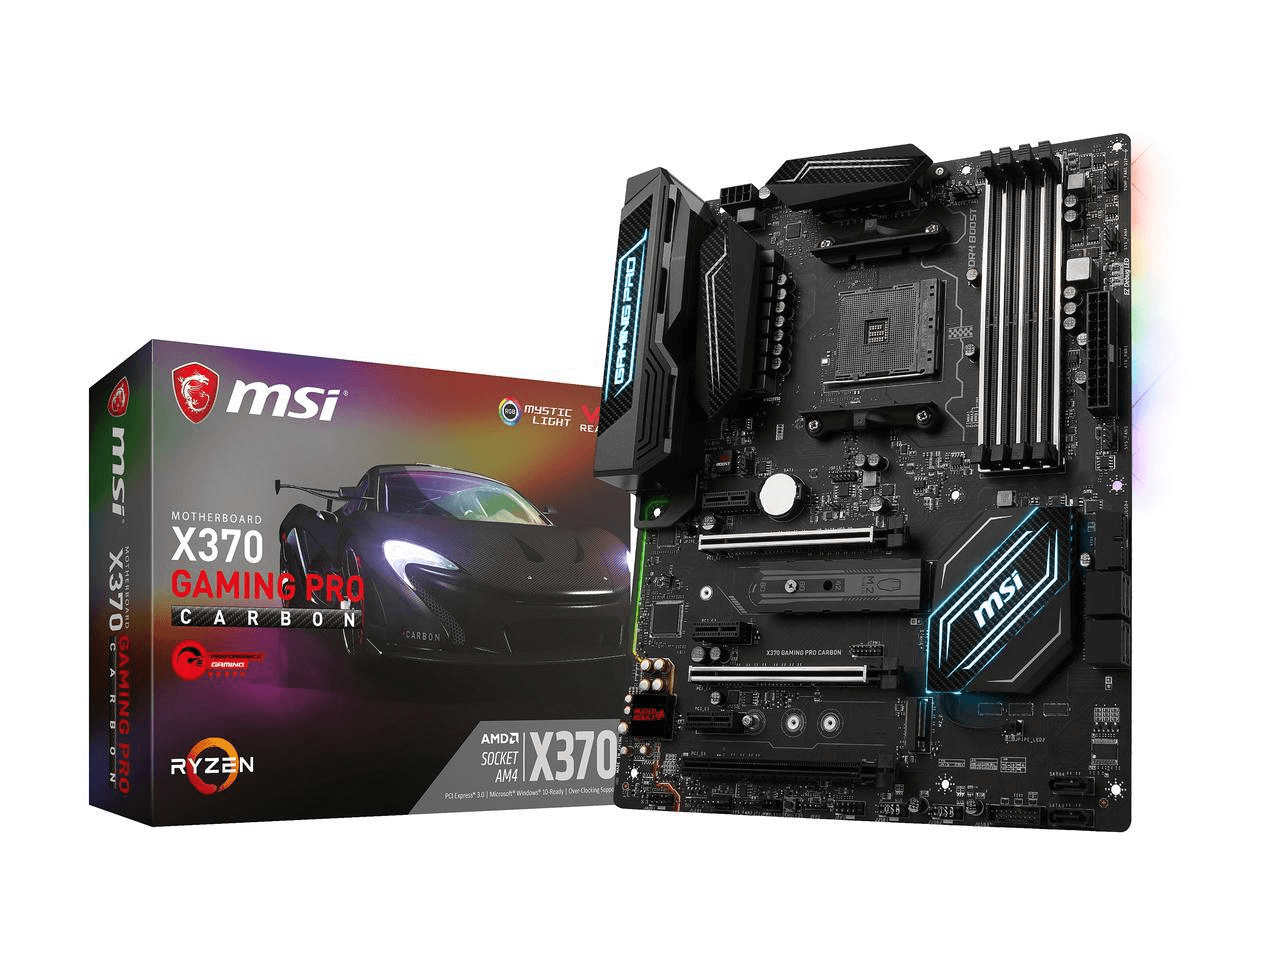 MSI X370 Gaming Pro Carbon AM4 Gaming Motherboard